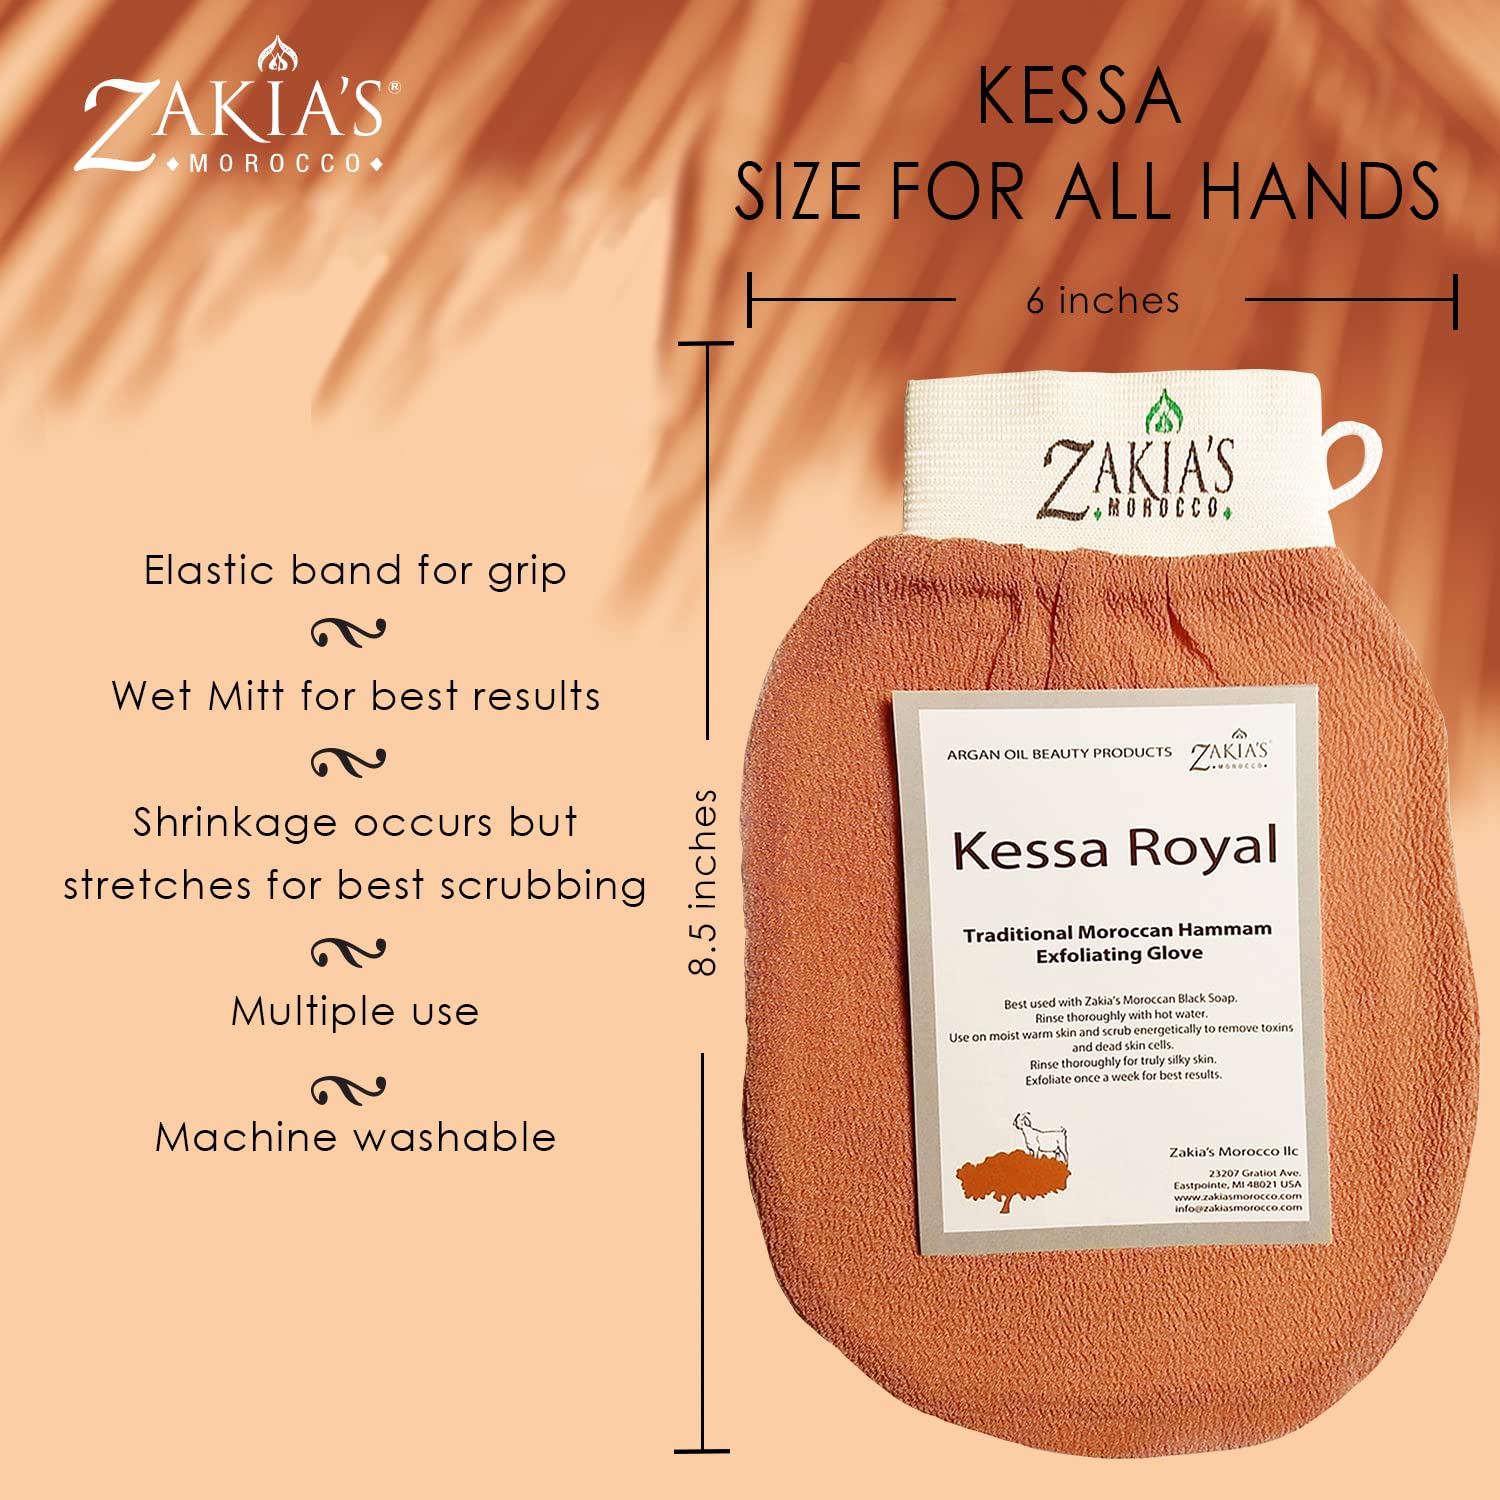 Zakia's Morocco Original Kessa Exfoliating Glove - Salmon Beige - Microdermabrasion At Home Exfoliating Mitts, Removes unwanted dead skin, dirt and grime and Keratosis Pilaris. Great for spray tan removal and preparation. Made of 100% natural Rayon. (1 Un